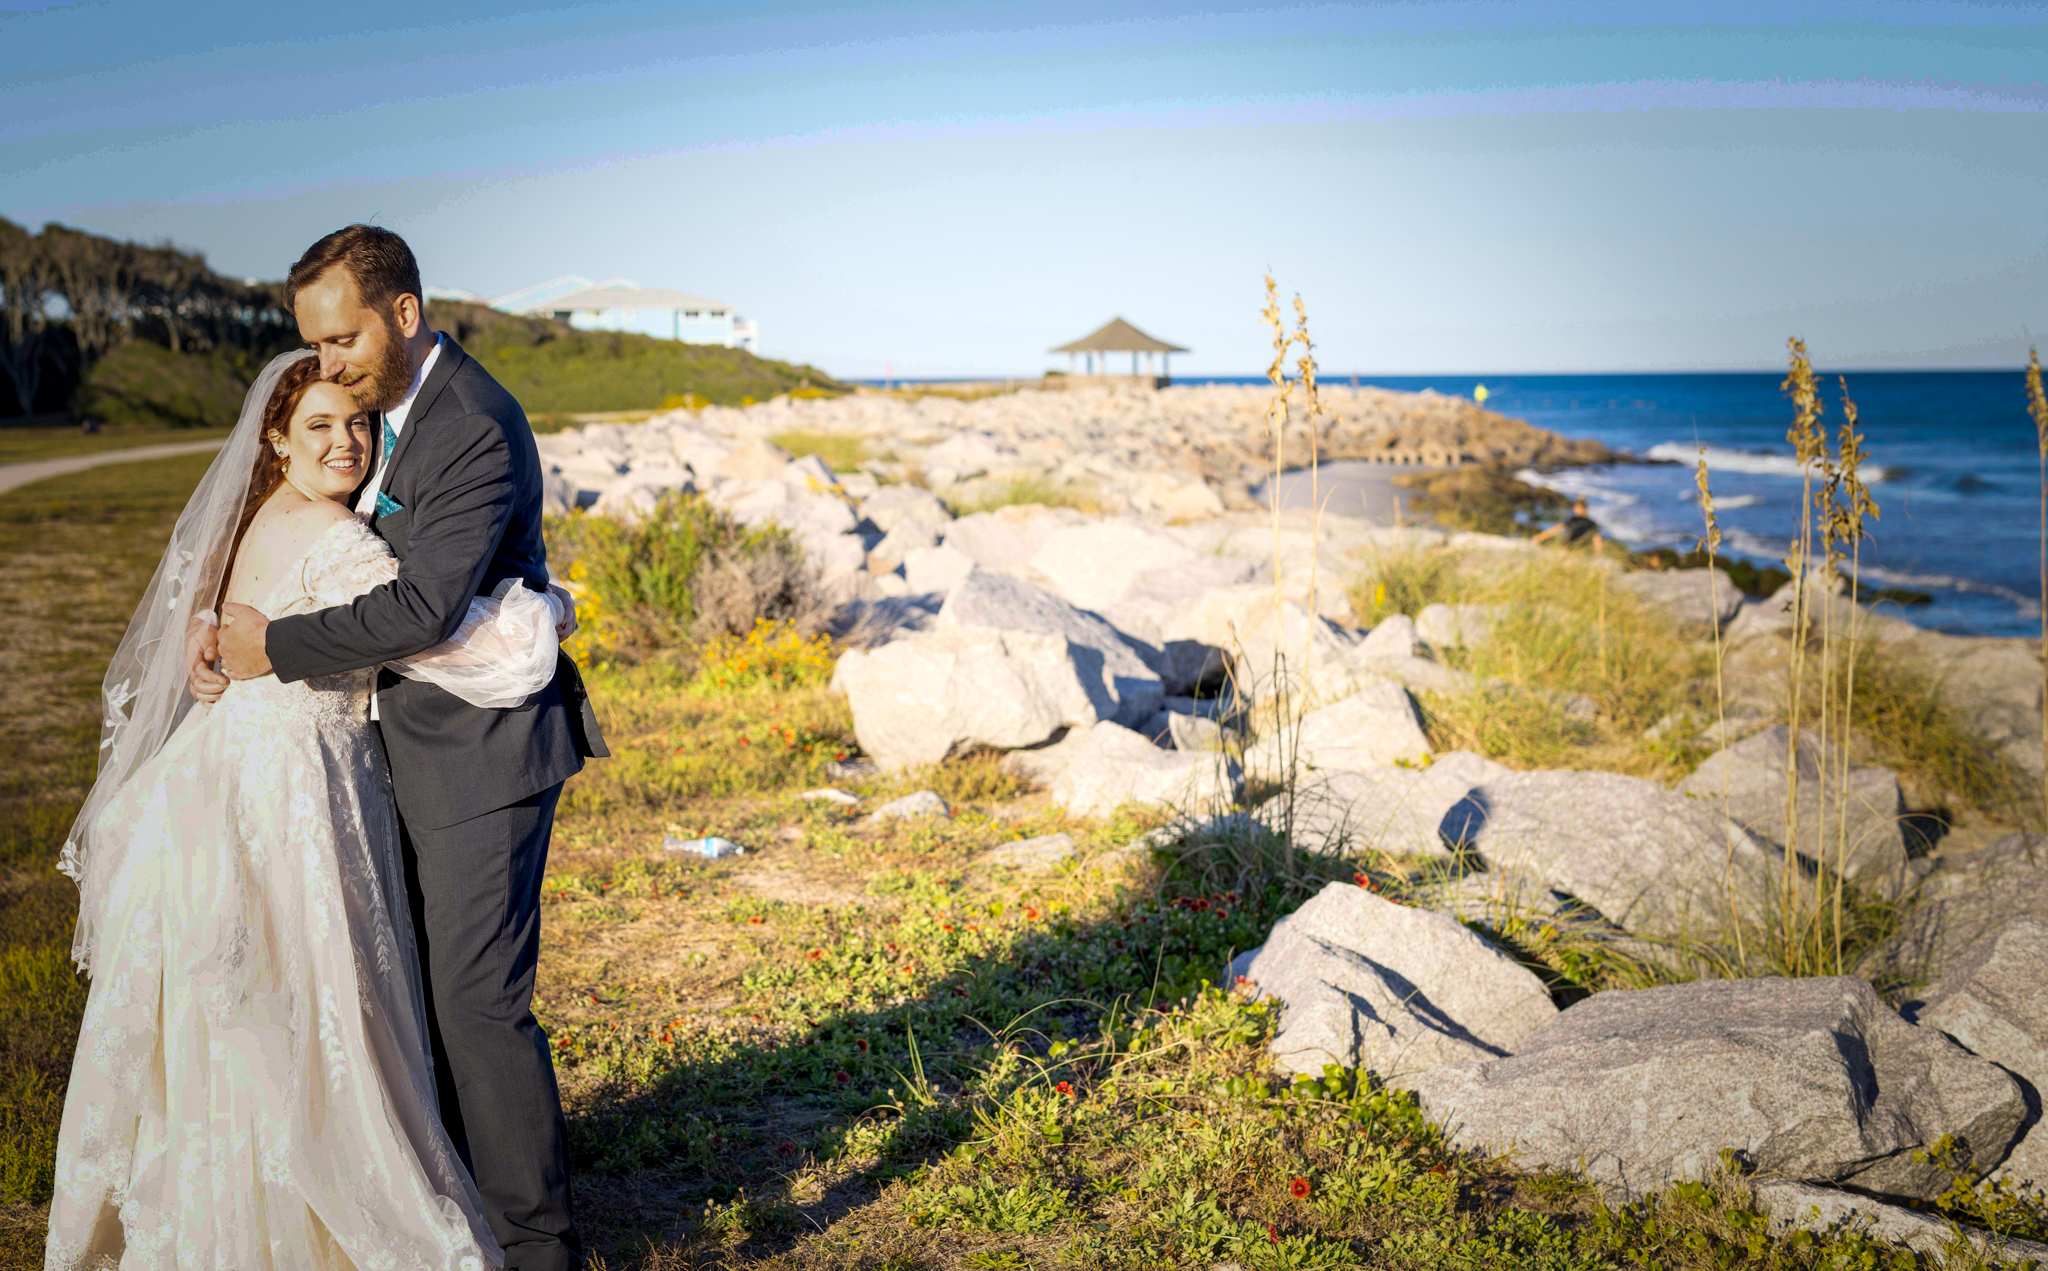 The Fort Fisher Rocks are a nice place to do wedding portraits.